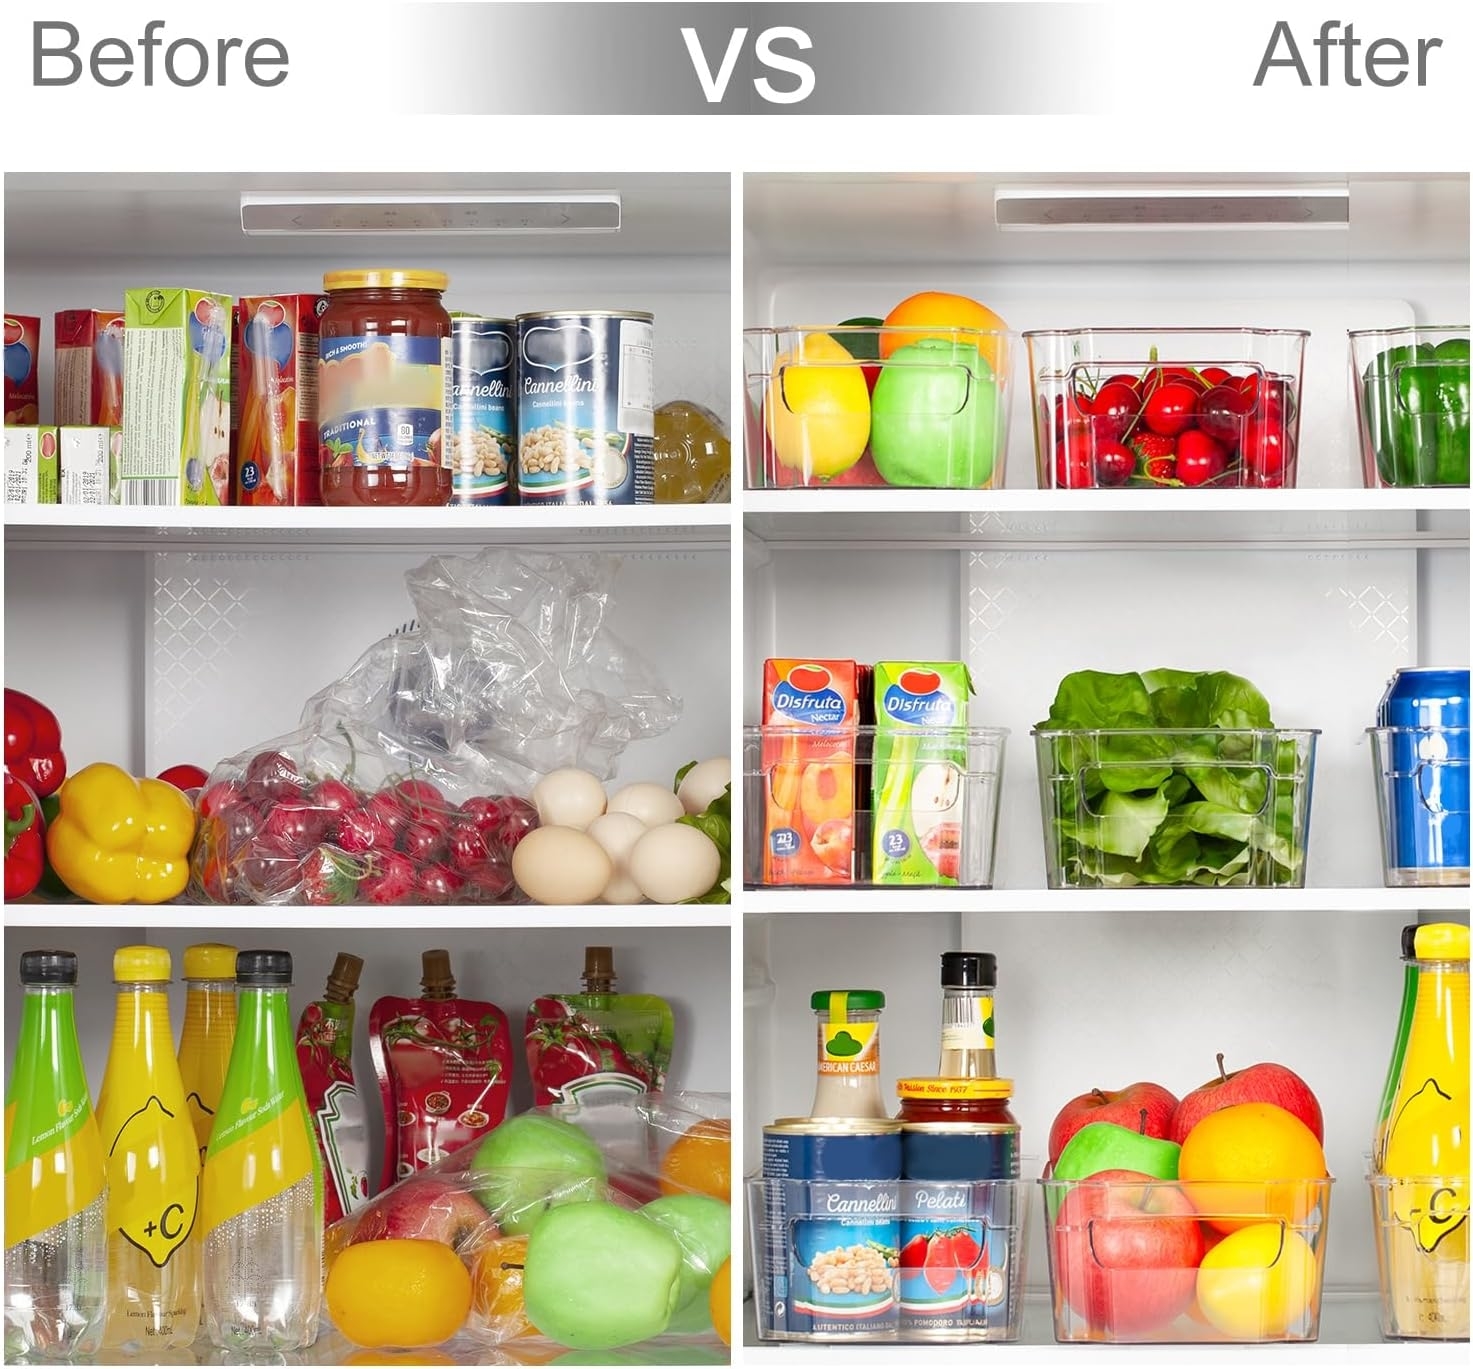 left: before image showing cluttered fridge with no organization / right: after image of organized fridge with clear drawers and more space